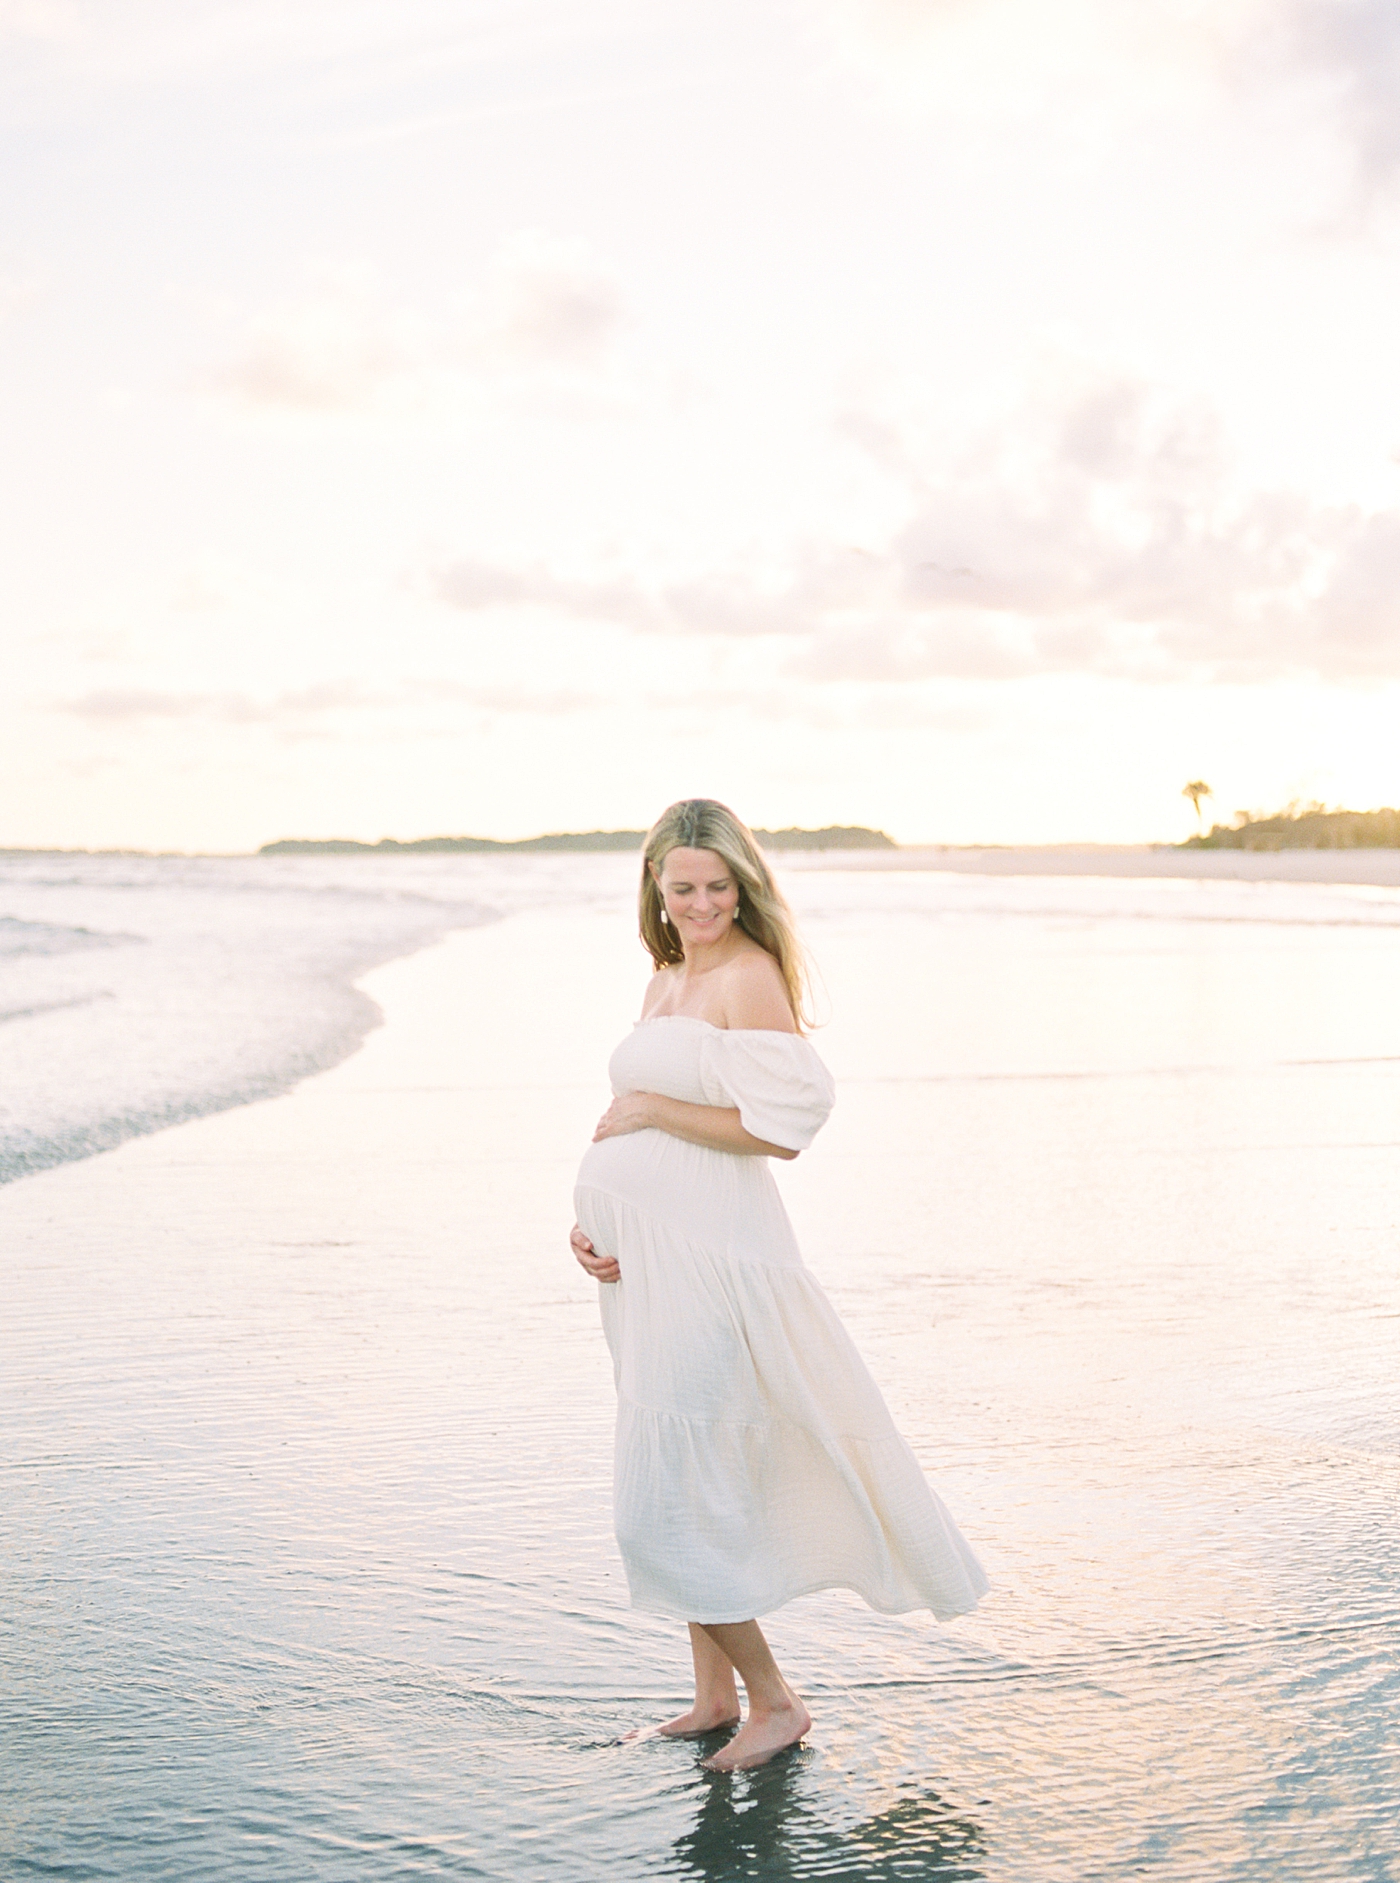 Mom to be in a white dress standing in the ocean at sunset | Image by Caitlyn Motycka